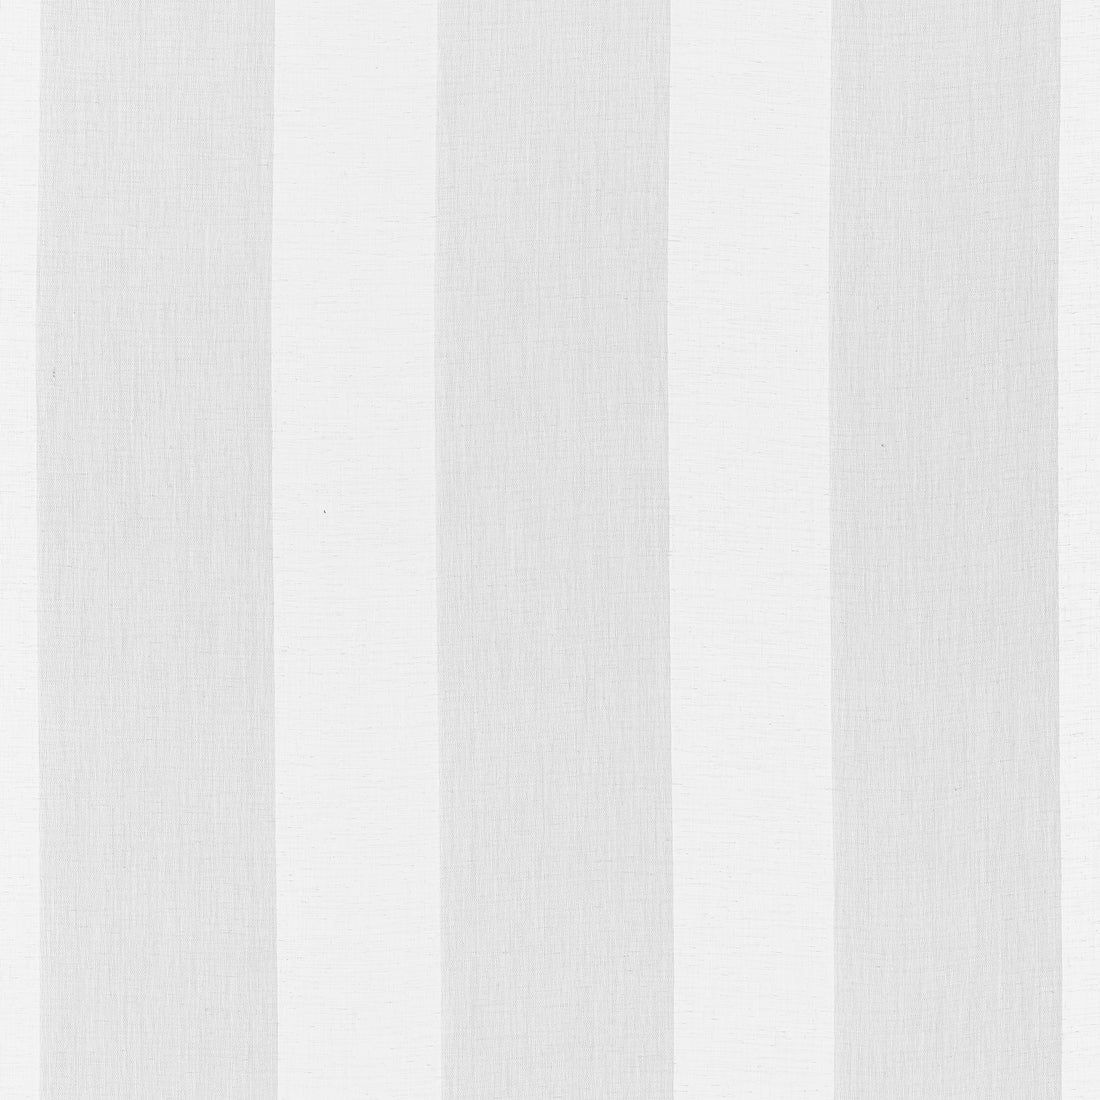 Manchester Stripe fabric in snow white color - pattern number FWW7132 - by Thibaut in the Atmosphere collection